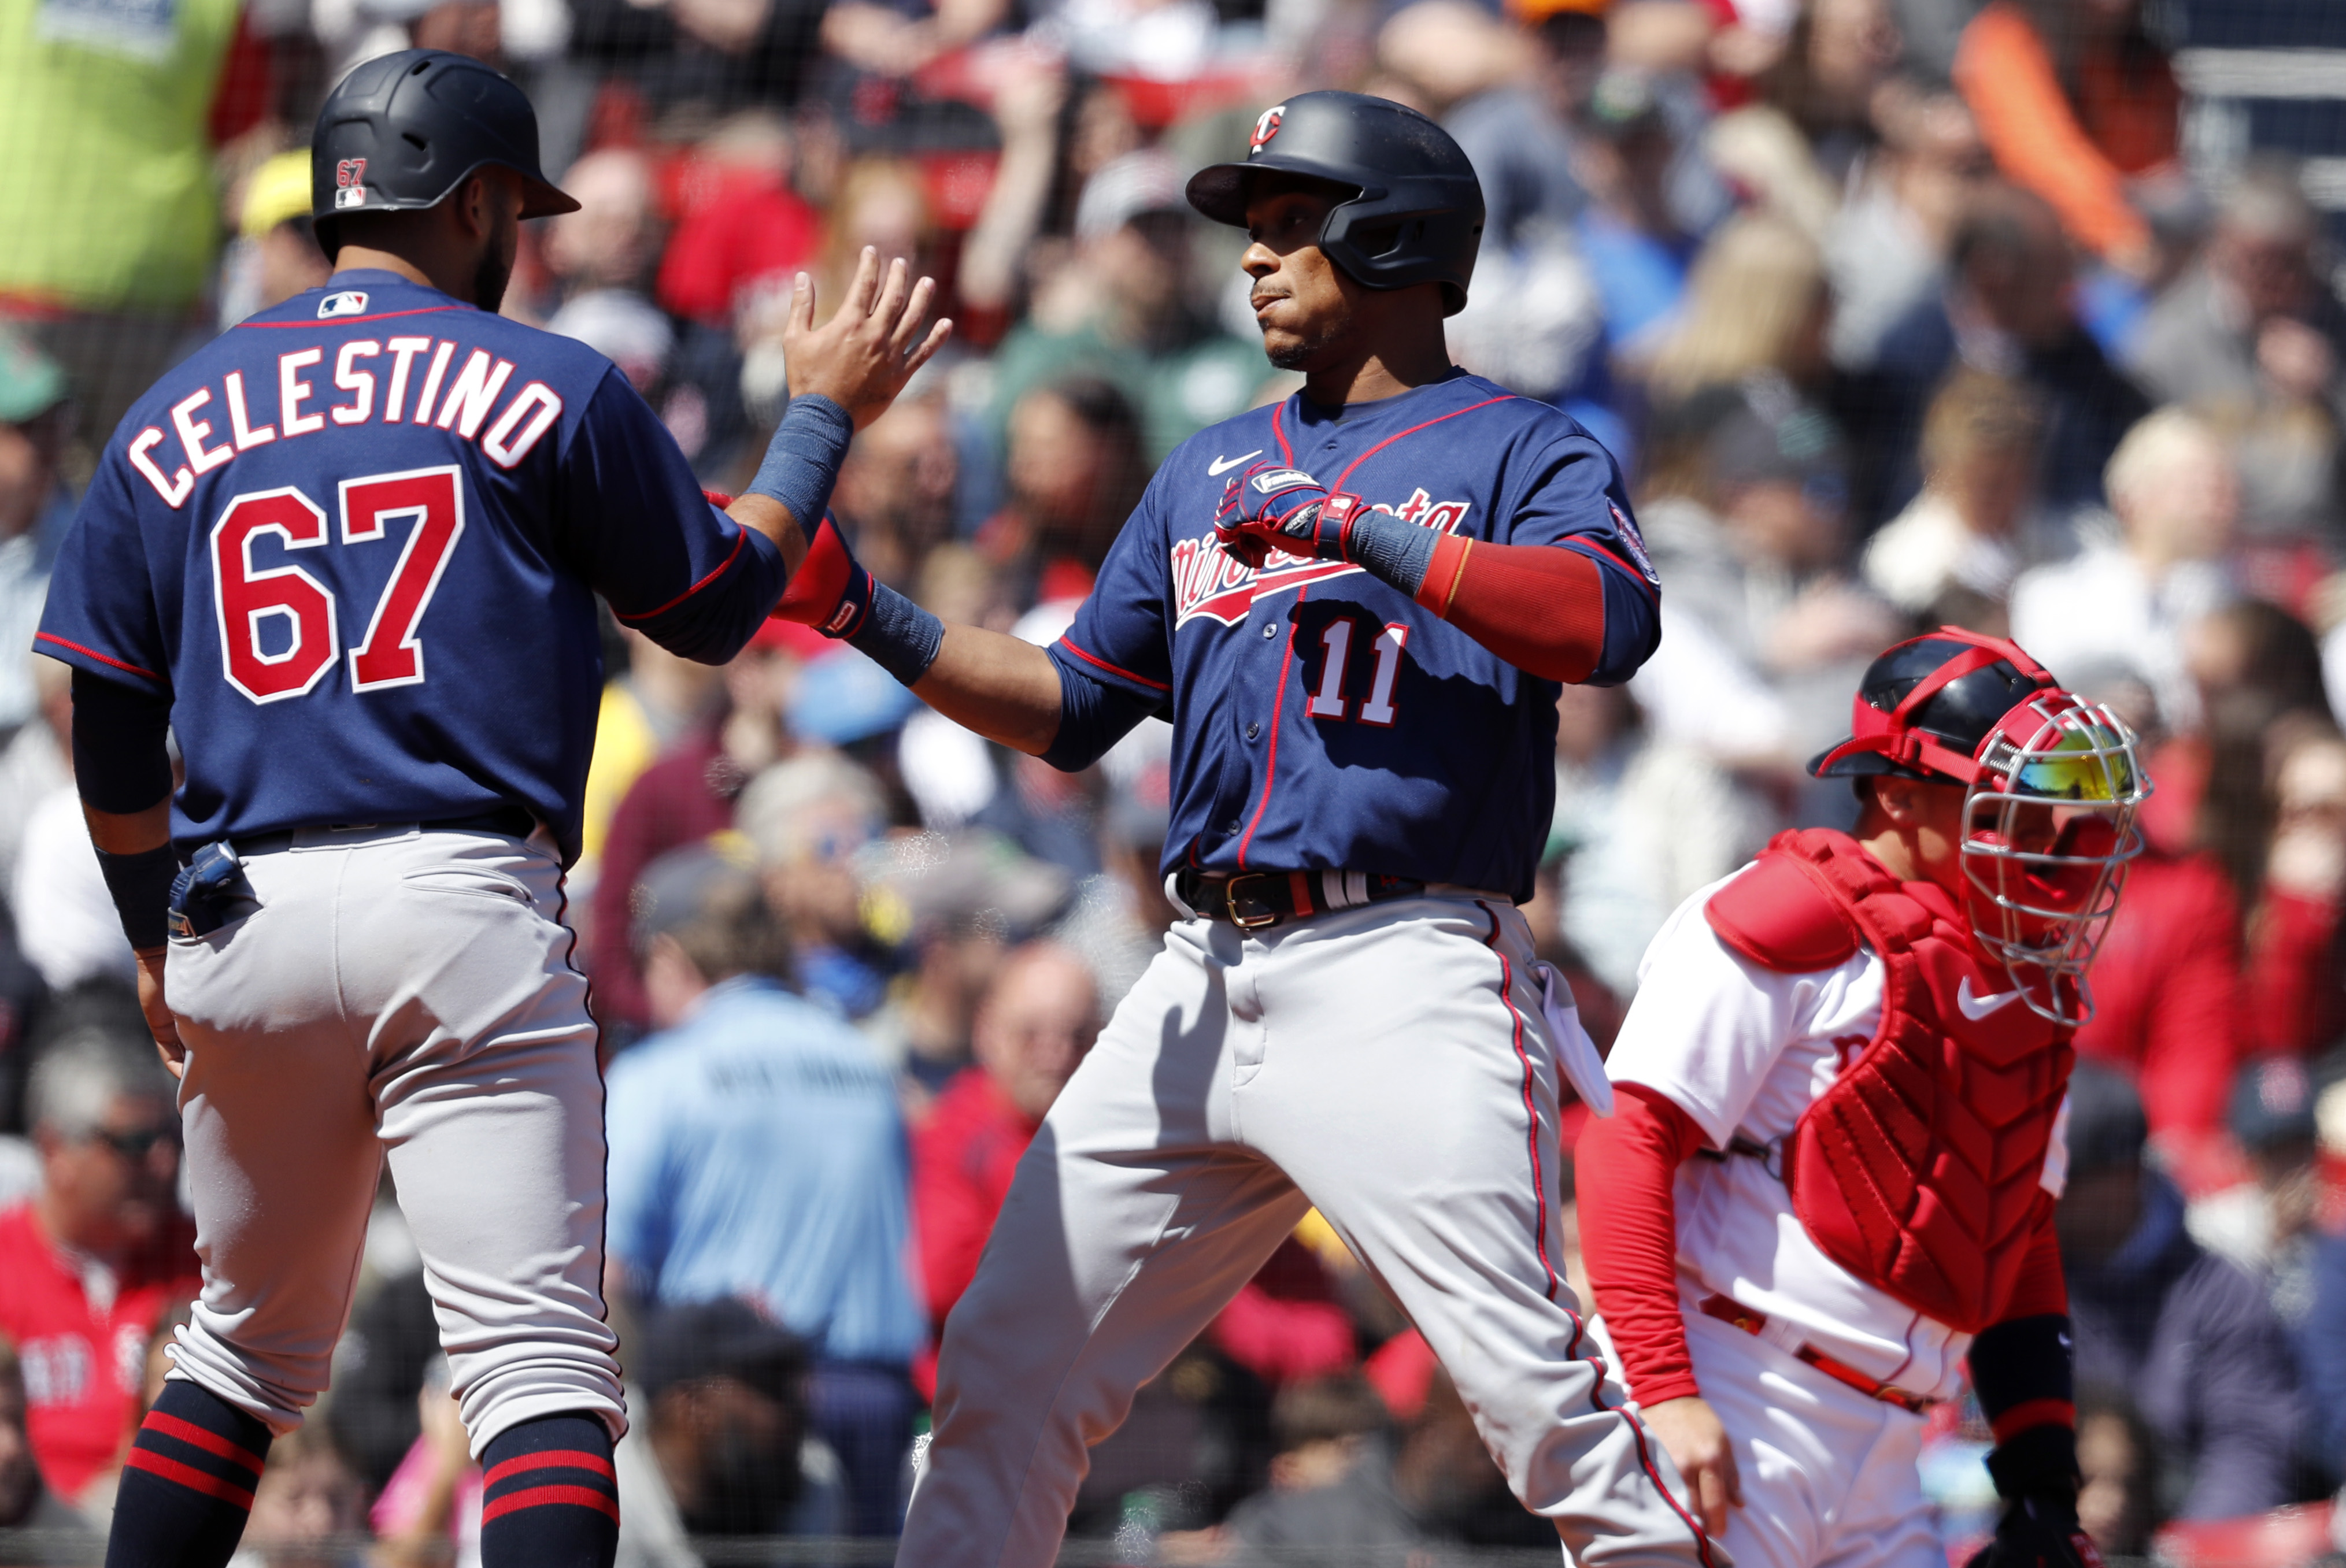 Polanco HR, 4 RBIs; Twins Beat Red Sox 8-3 On Patriots’ Day